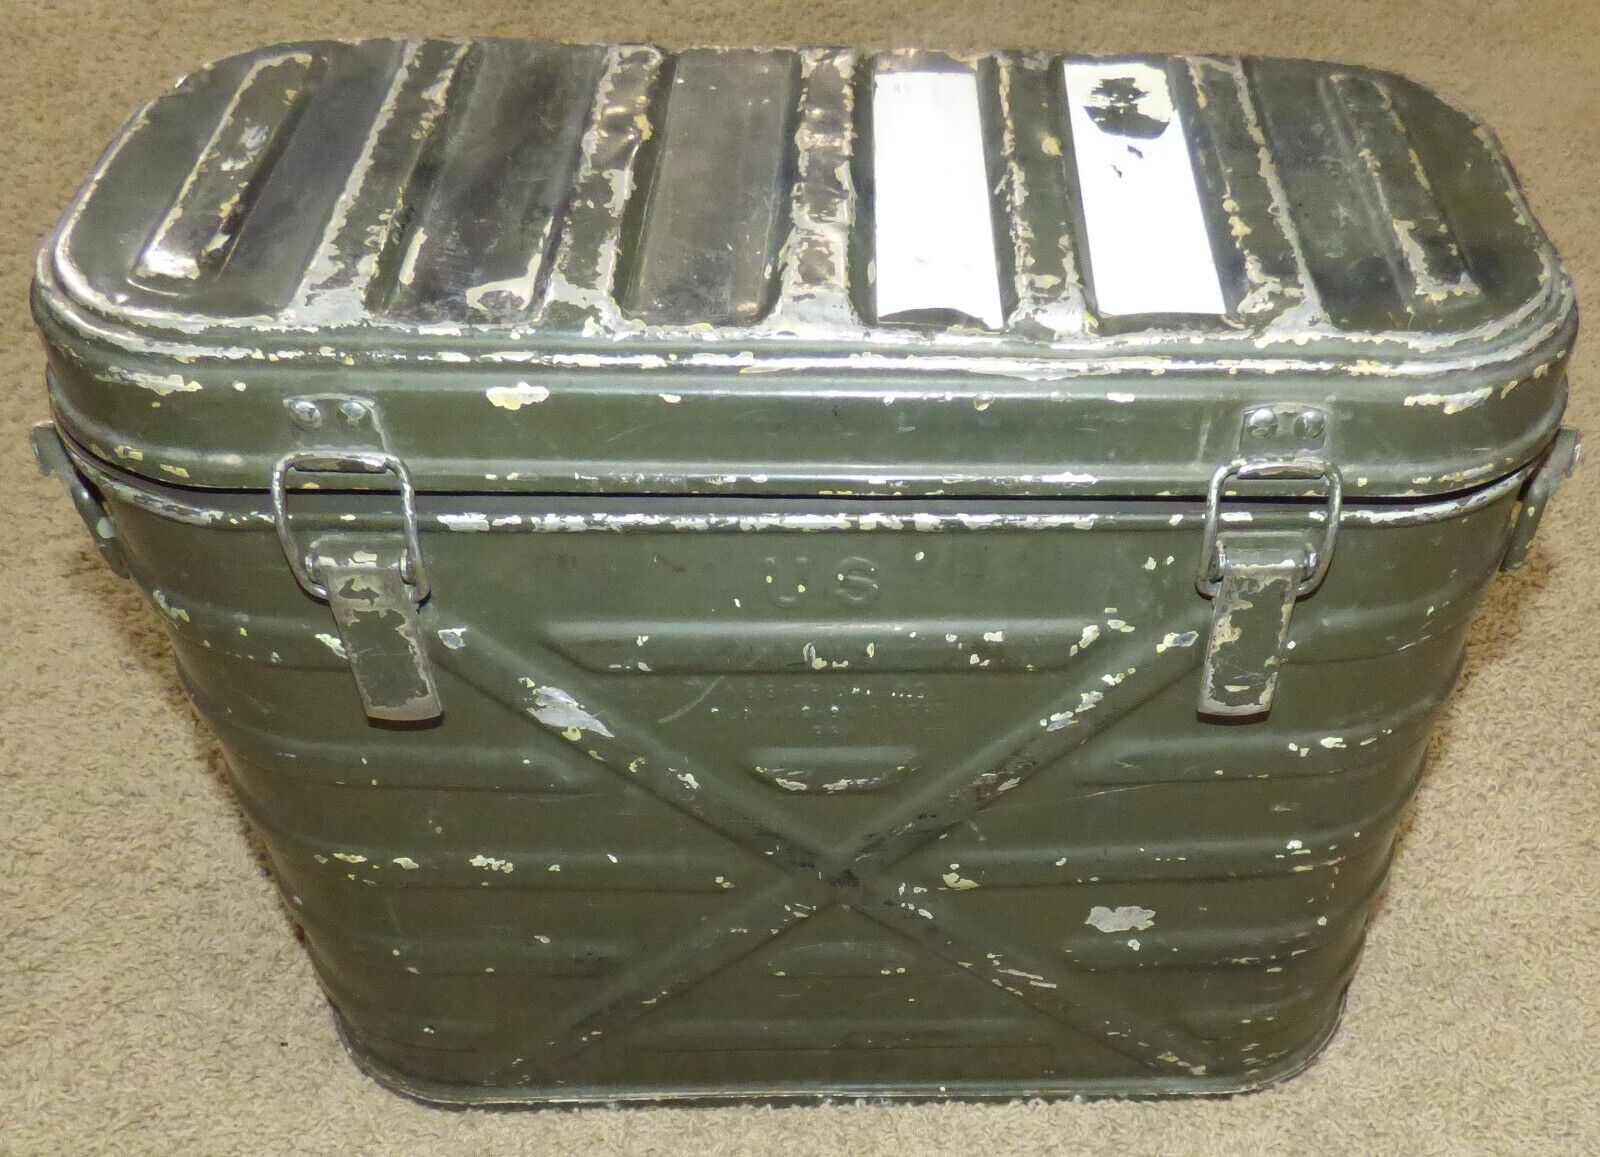 U.S. Military Aluminum Mermite Hot Cold Insulated Food Container Cooler 1984